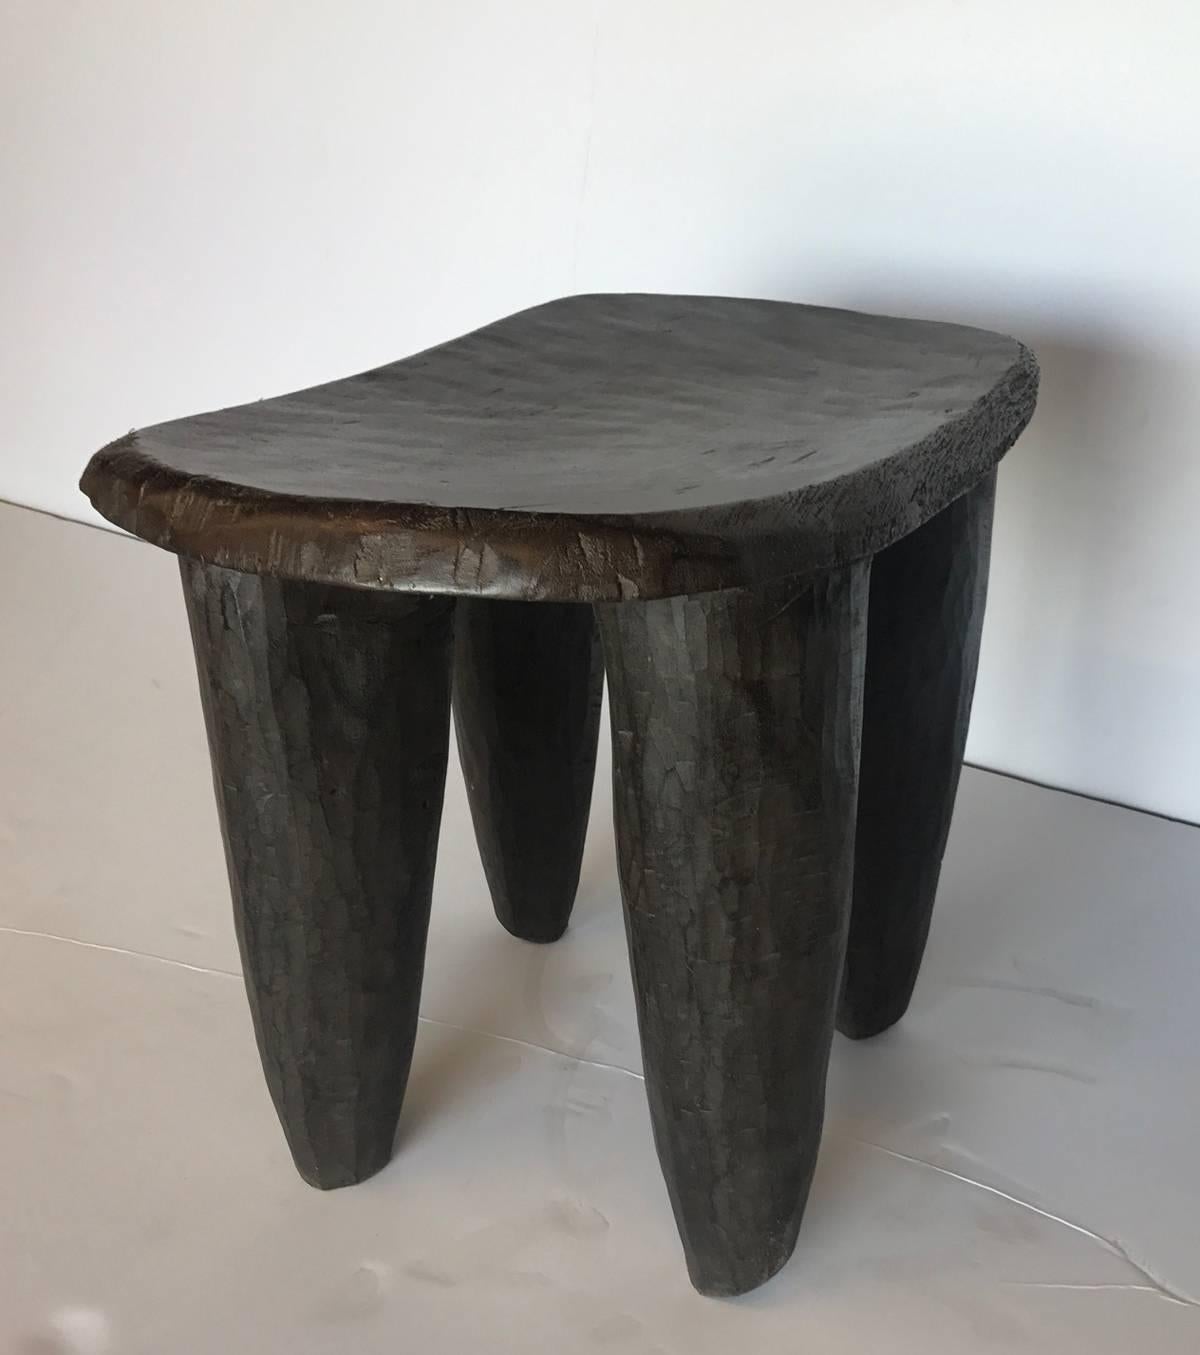 Antique hand-carved iroko wood stool or small table from the Sinufo tribe in Mali. Soft and smooth patina. Comfortable to sit on or perfect as a side table. Have a similar stool in stock to make a pair, please see photo.